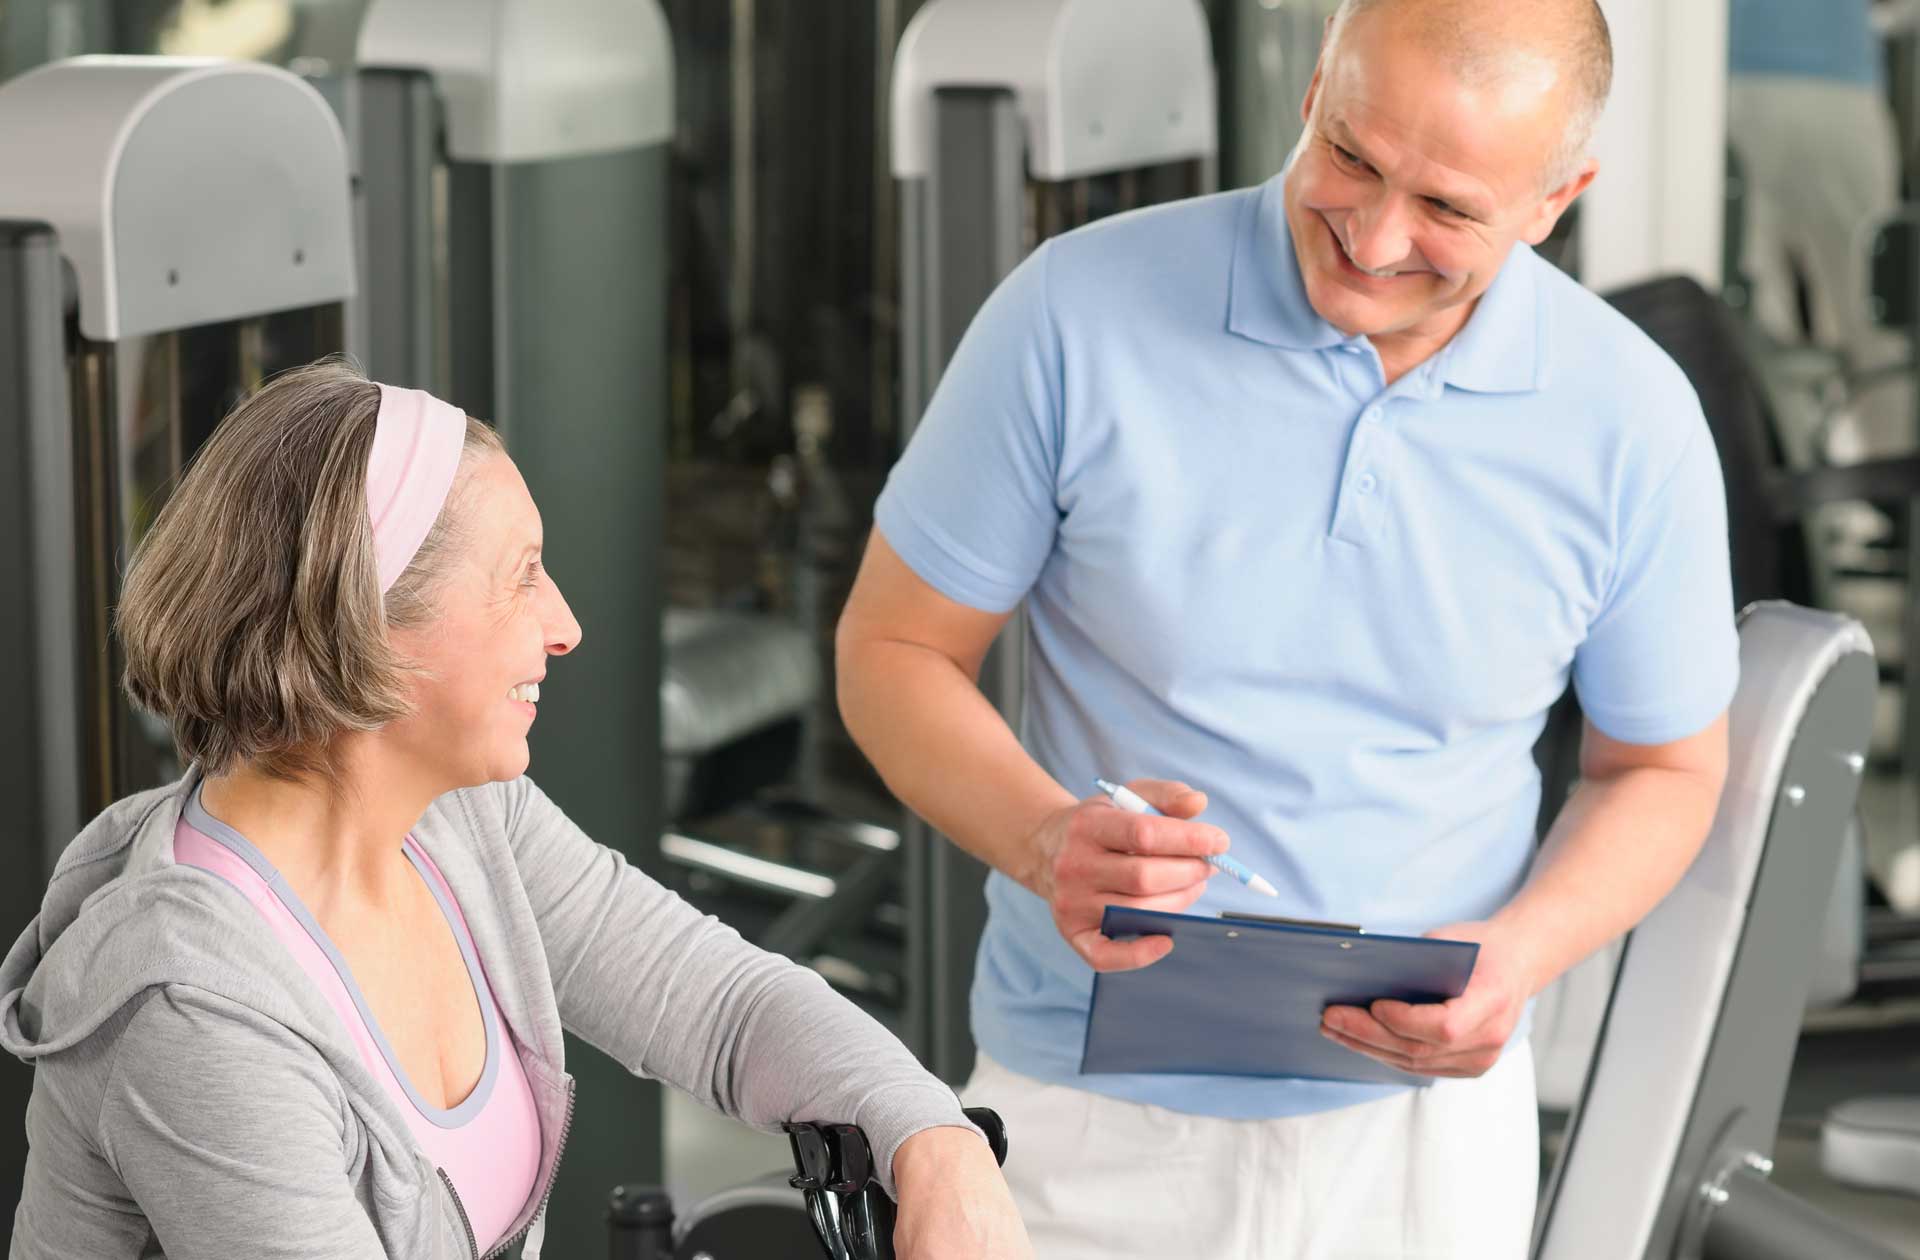 Physical therapist speaks with a patient in a rehabilitative center's gym